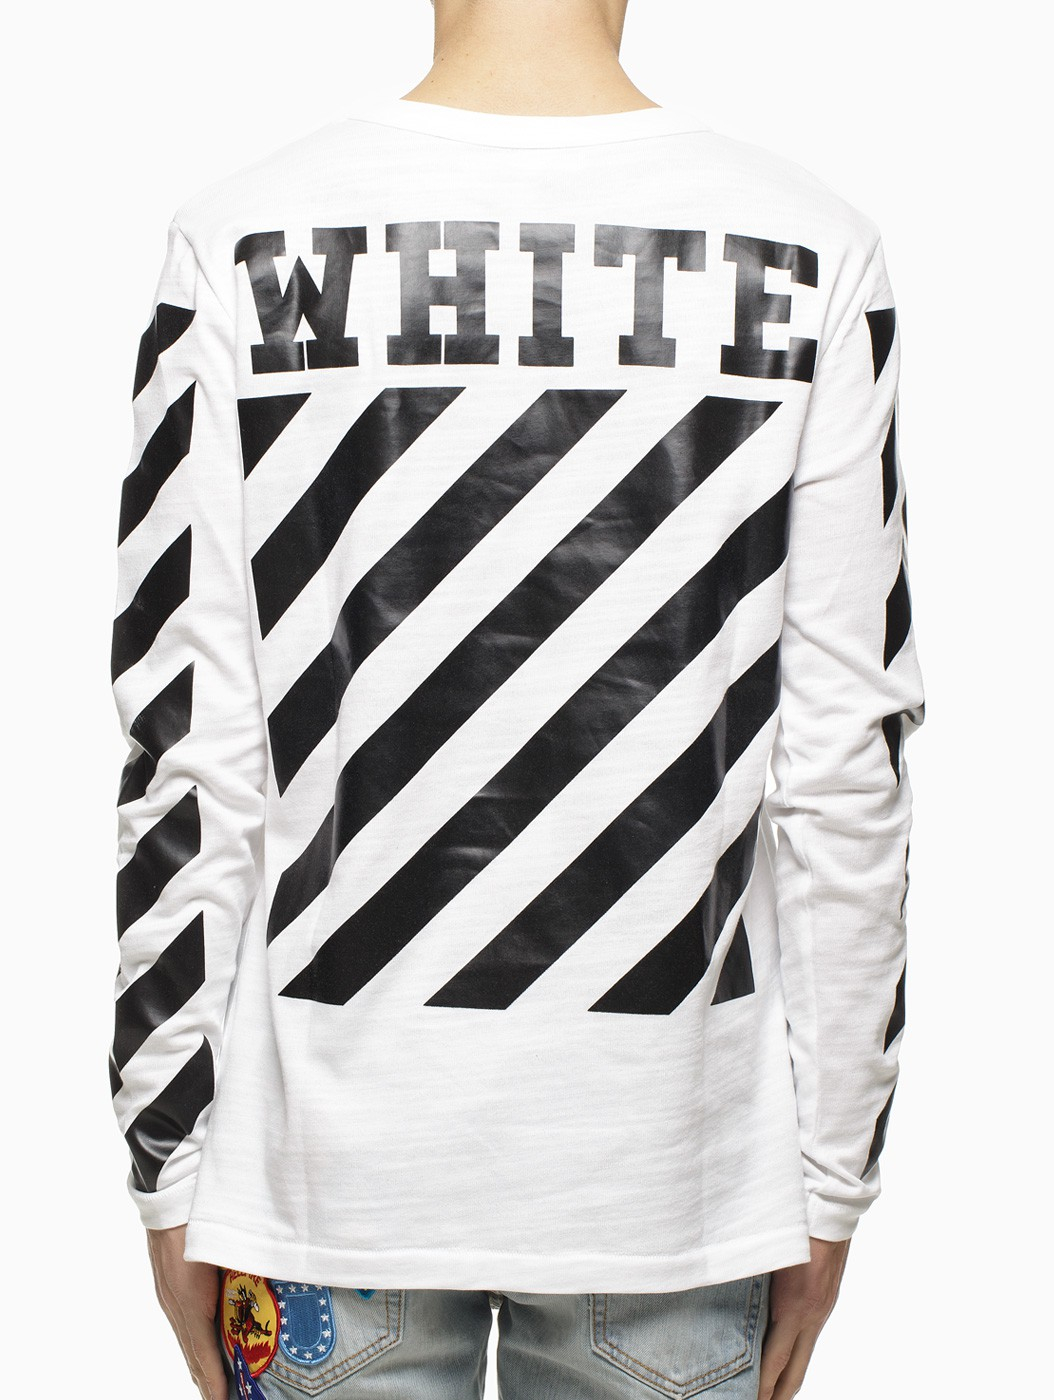 Off White White Striped Long Sleeve T Shirt Product 1 27518962 5 831215319 Normal 